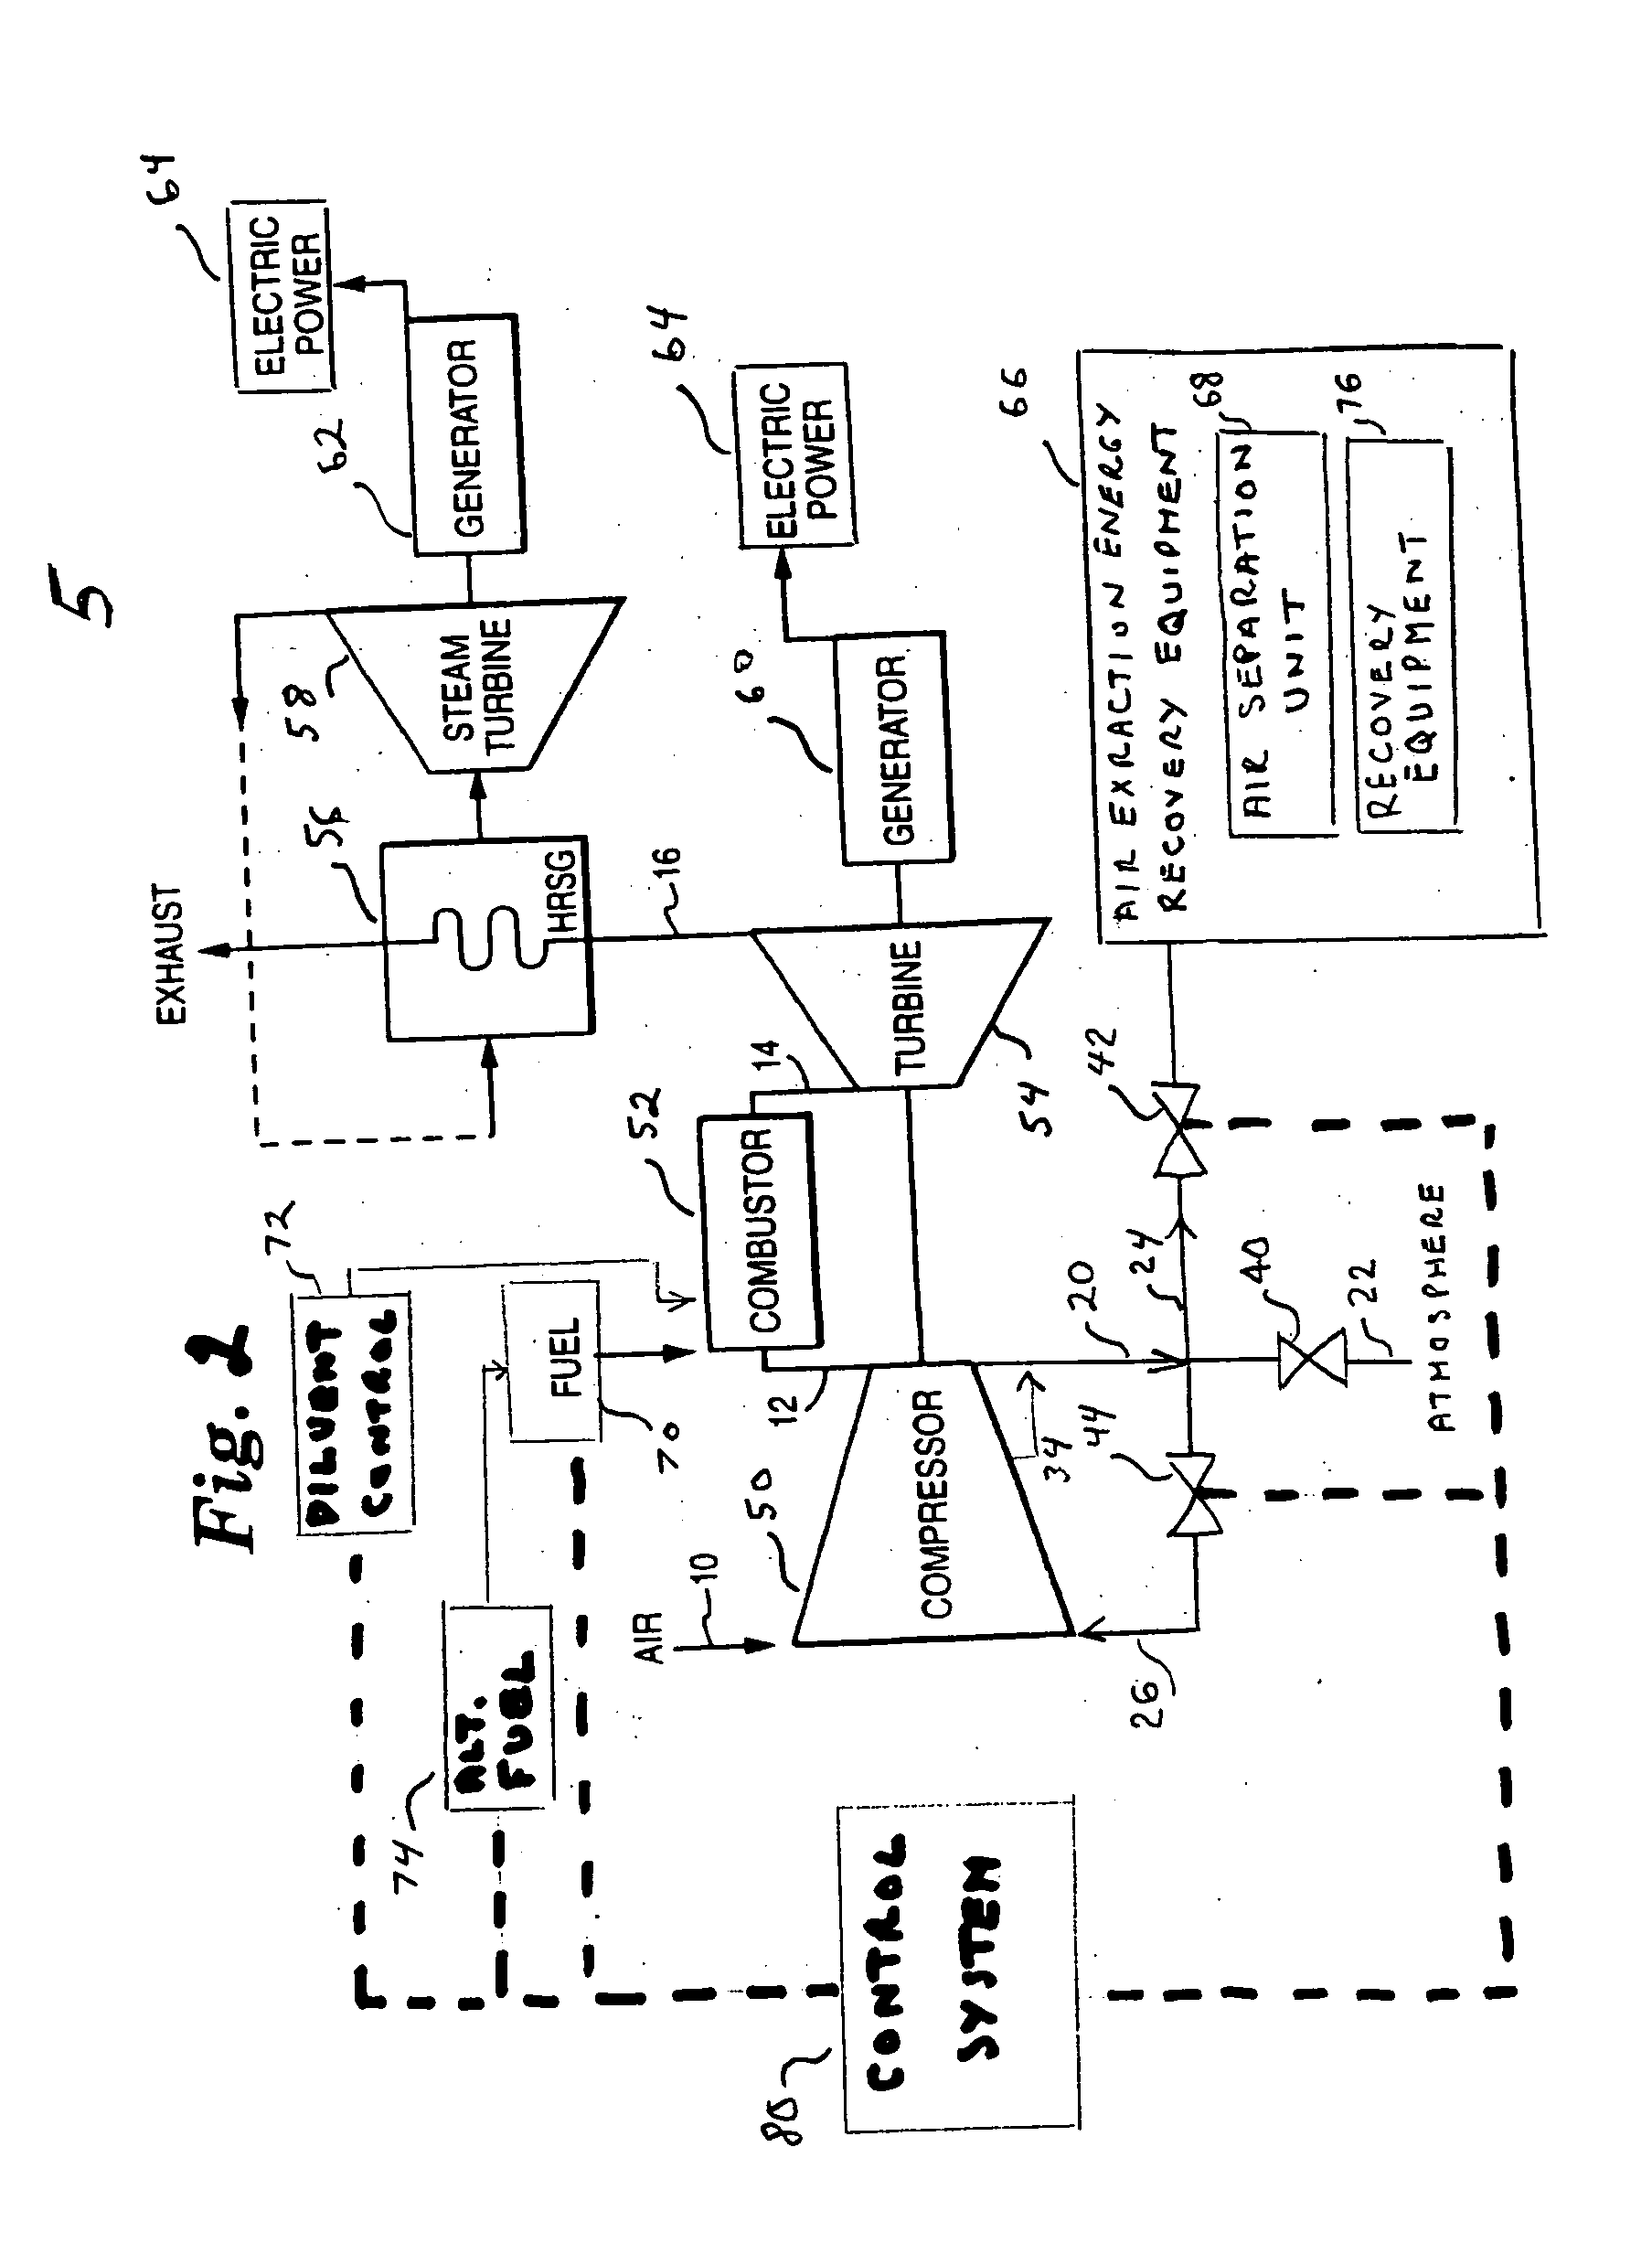 Method for gas turbine operation during under-frequency operation through use of air extraction